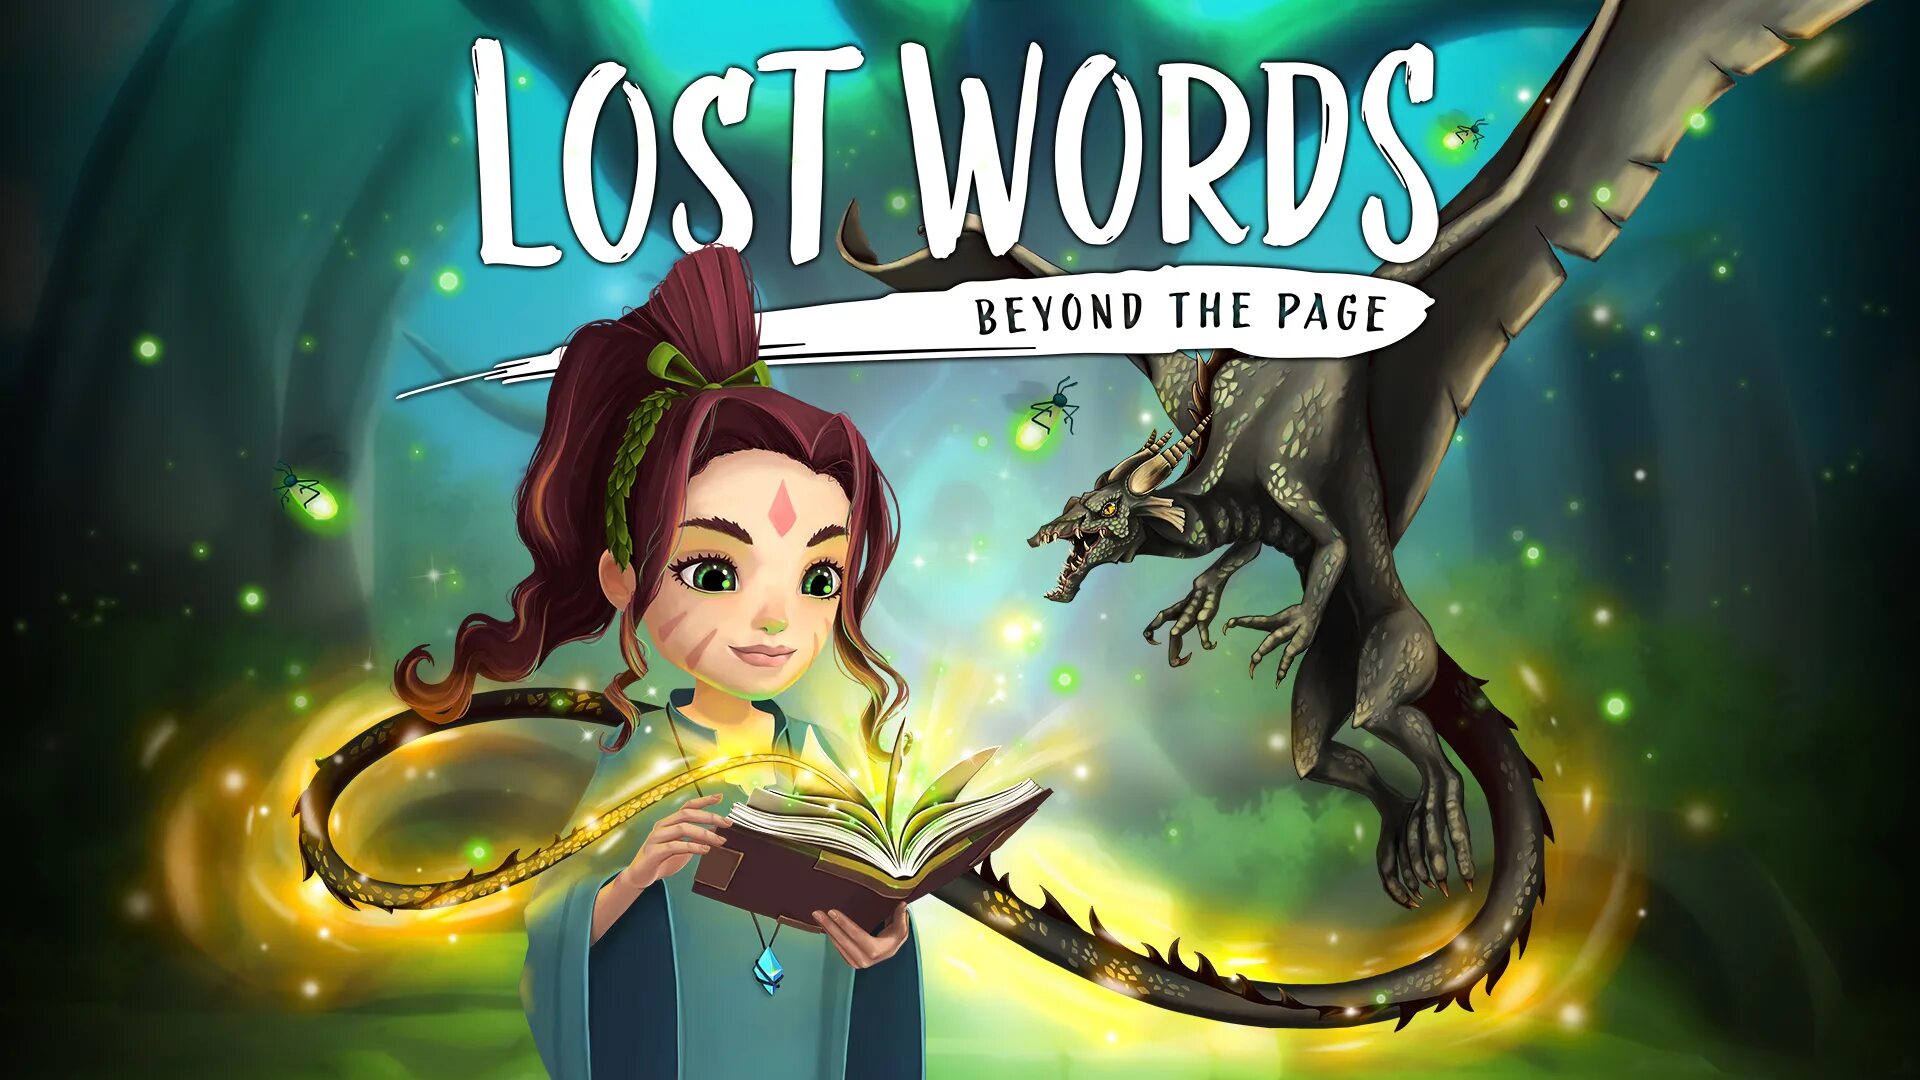 Beyond words. Lost Words Beyond the Page ps4. Lost Worlds Beyond the Page. Игры Lost Words Beyond the Page. Beyond the World игра.